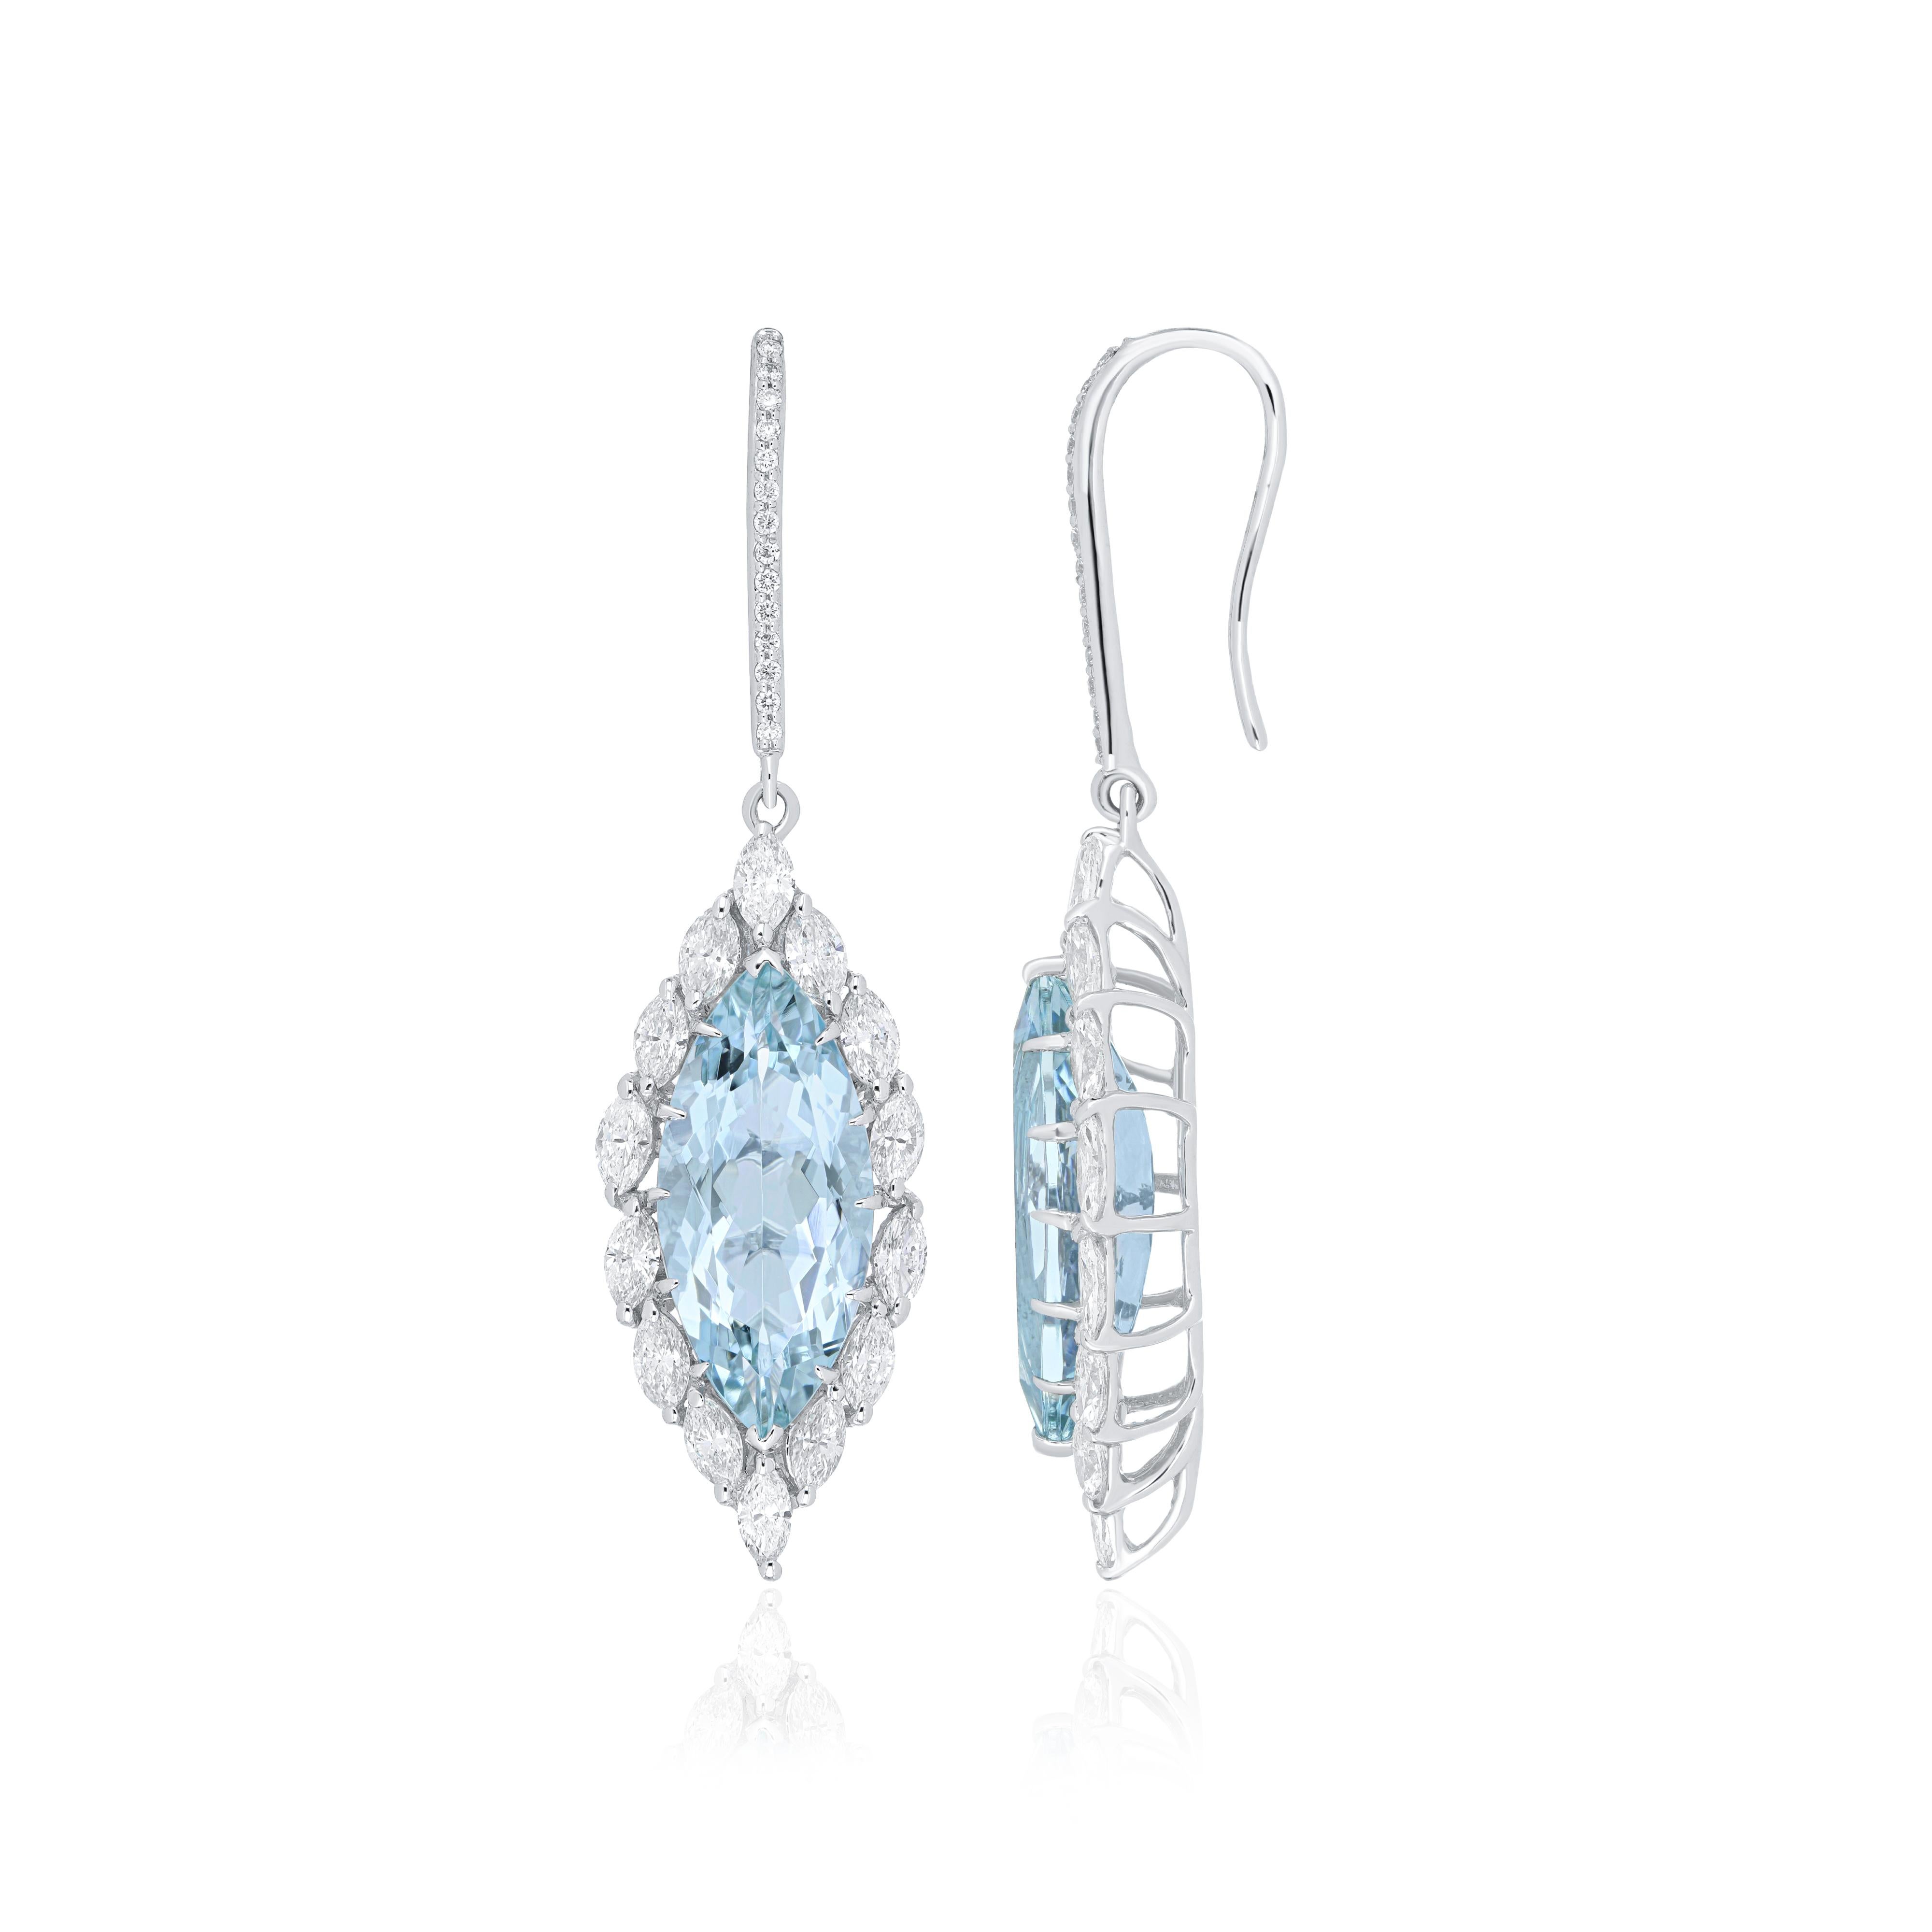 Elegant and exquisitely detailed 18 Karat White Gold Earrings, center set with Aquamarine Marquise 9.20Cts accented with  Marquise & Round Diamonds weighing approx 2.0Cts total. Beautifully Hand crafted in 18 Karat White Gold.

Product Details: -
